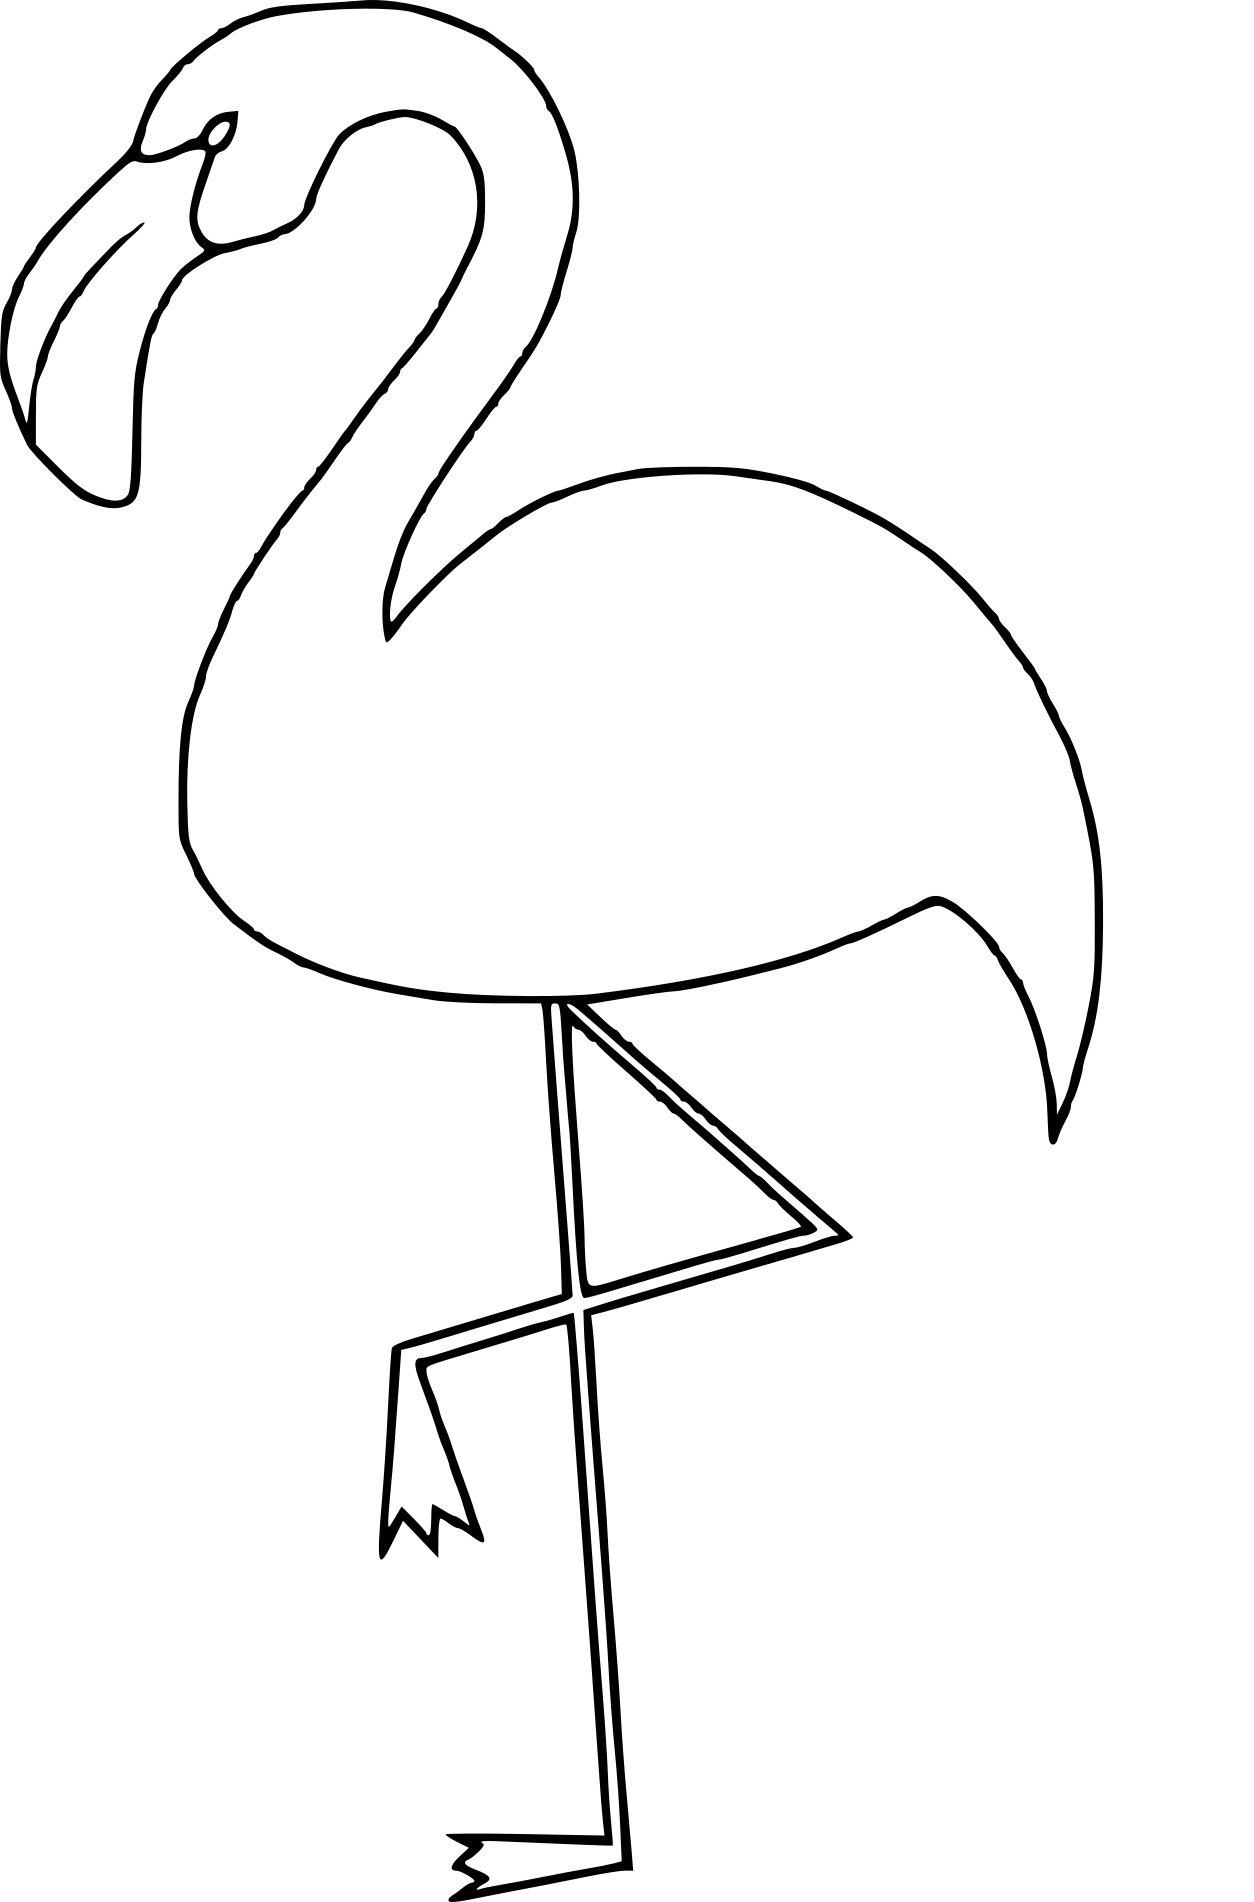 Pink Flamingo drawing and coloring page